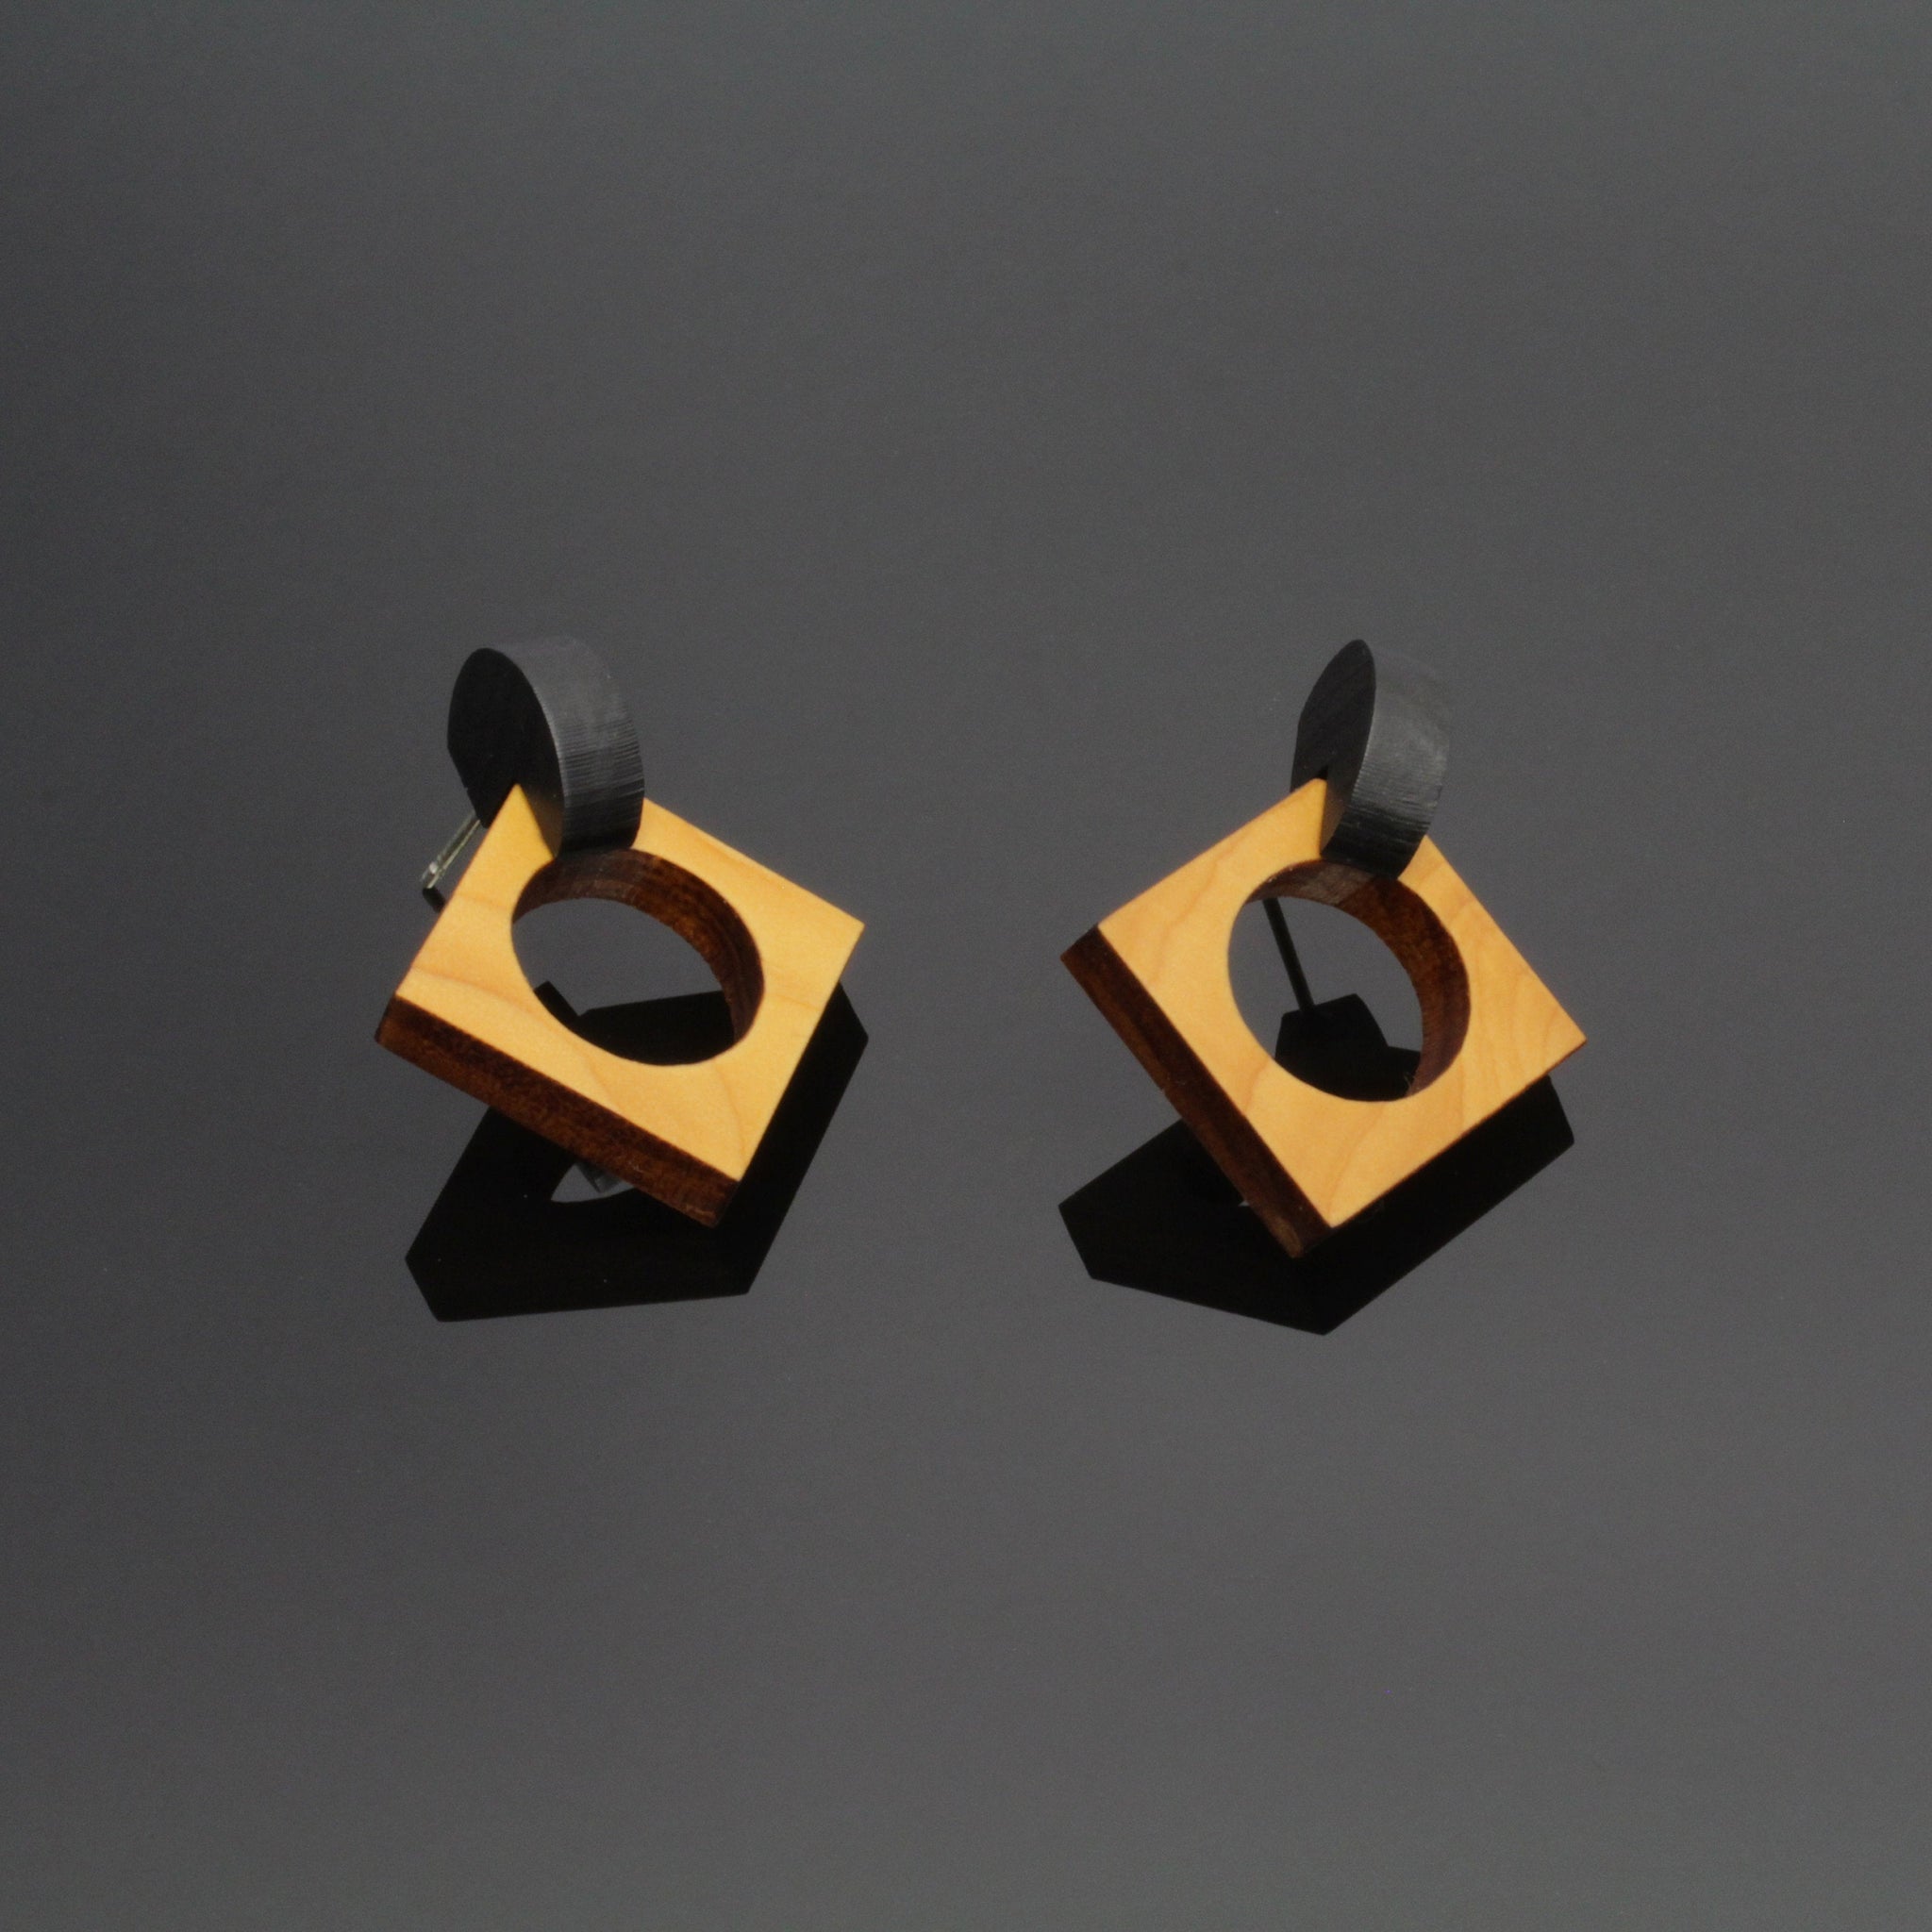 Cernu - Oversize Geometric studs in wood and sterling silver. Made in Ireland